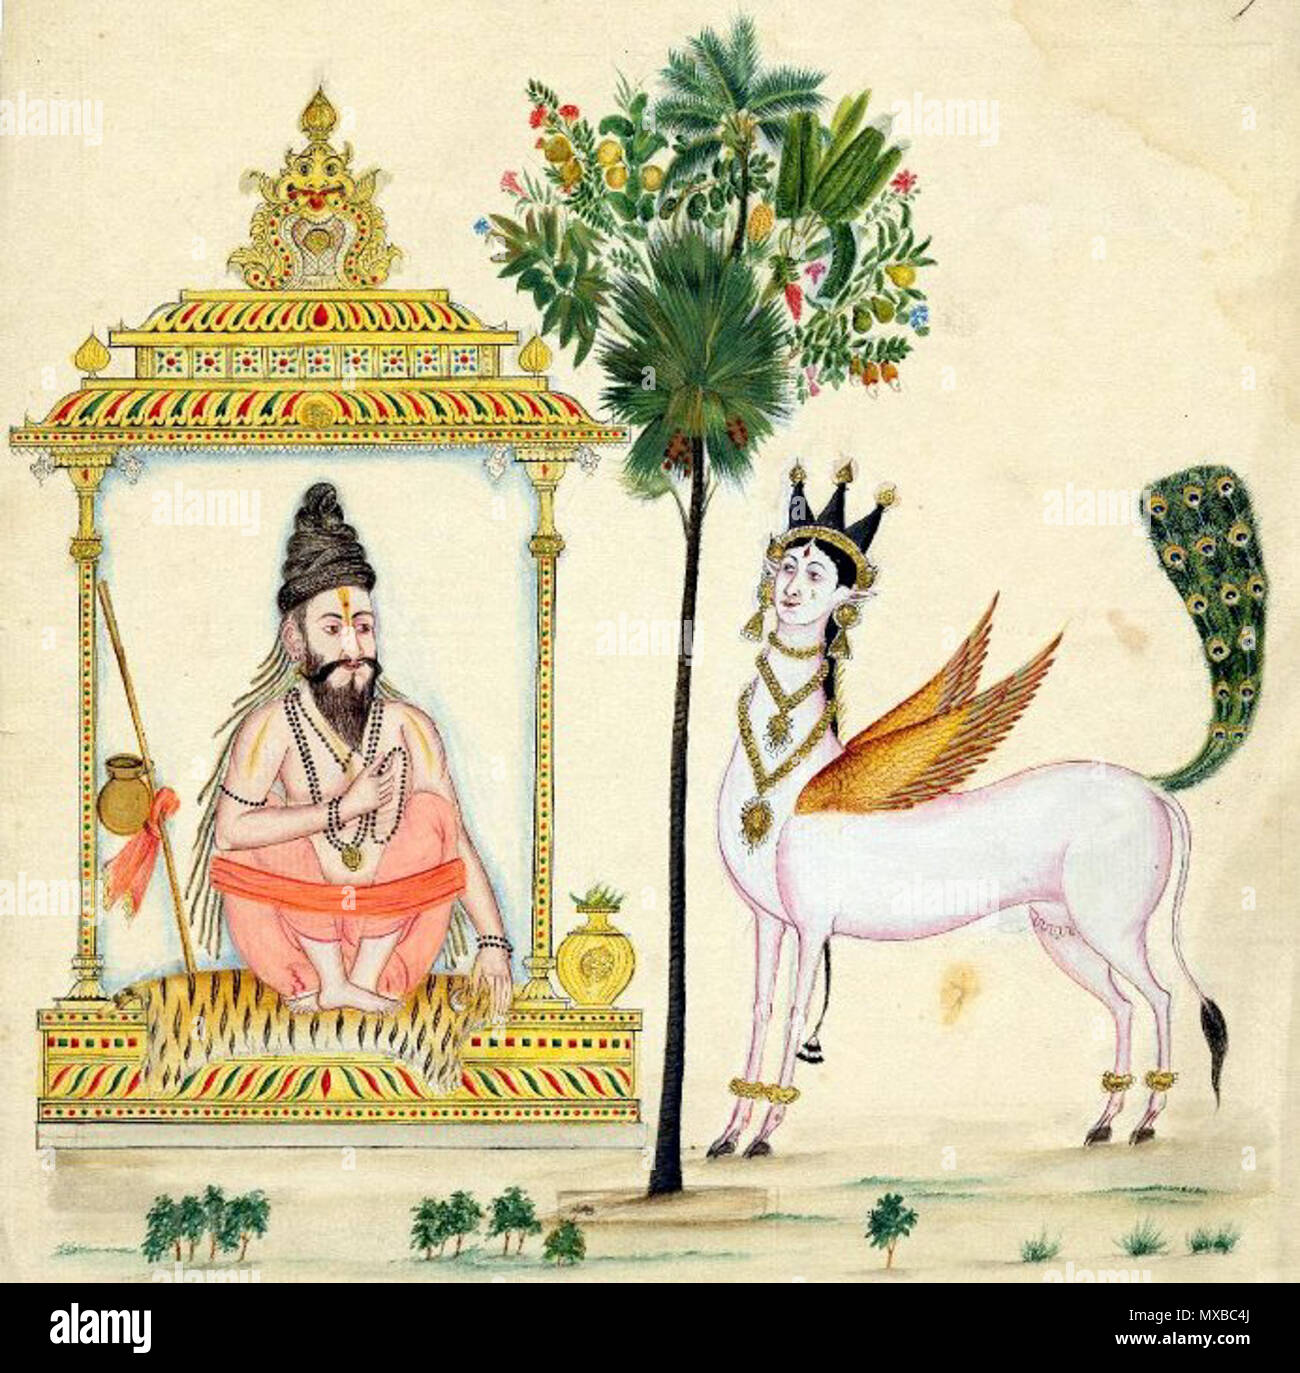 . English: 'Painting of a rishi, the Parijata Tree and Kamadhenu. The sage sits in an architectural frame, seated on a tiger-skin and with yogabandha. In his right hand he holds a rosary. To his right are his water-pot and staff while to his left is a lotah with bilva leaves. In the centre of the page is the Parijata Tree, with many different types of leaves and flowers. To the left, is the wish-fulfiling mythic beast, Kamadhenu or Surabhi. It has a human crowned head, the body of a cow (with anklets), as well as wings and a peacock's tail. An element of perspective is provided by the sketched Stock Photo